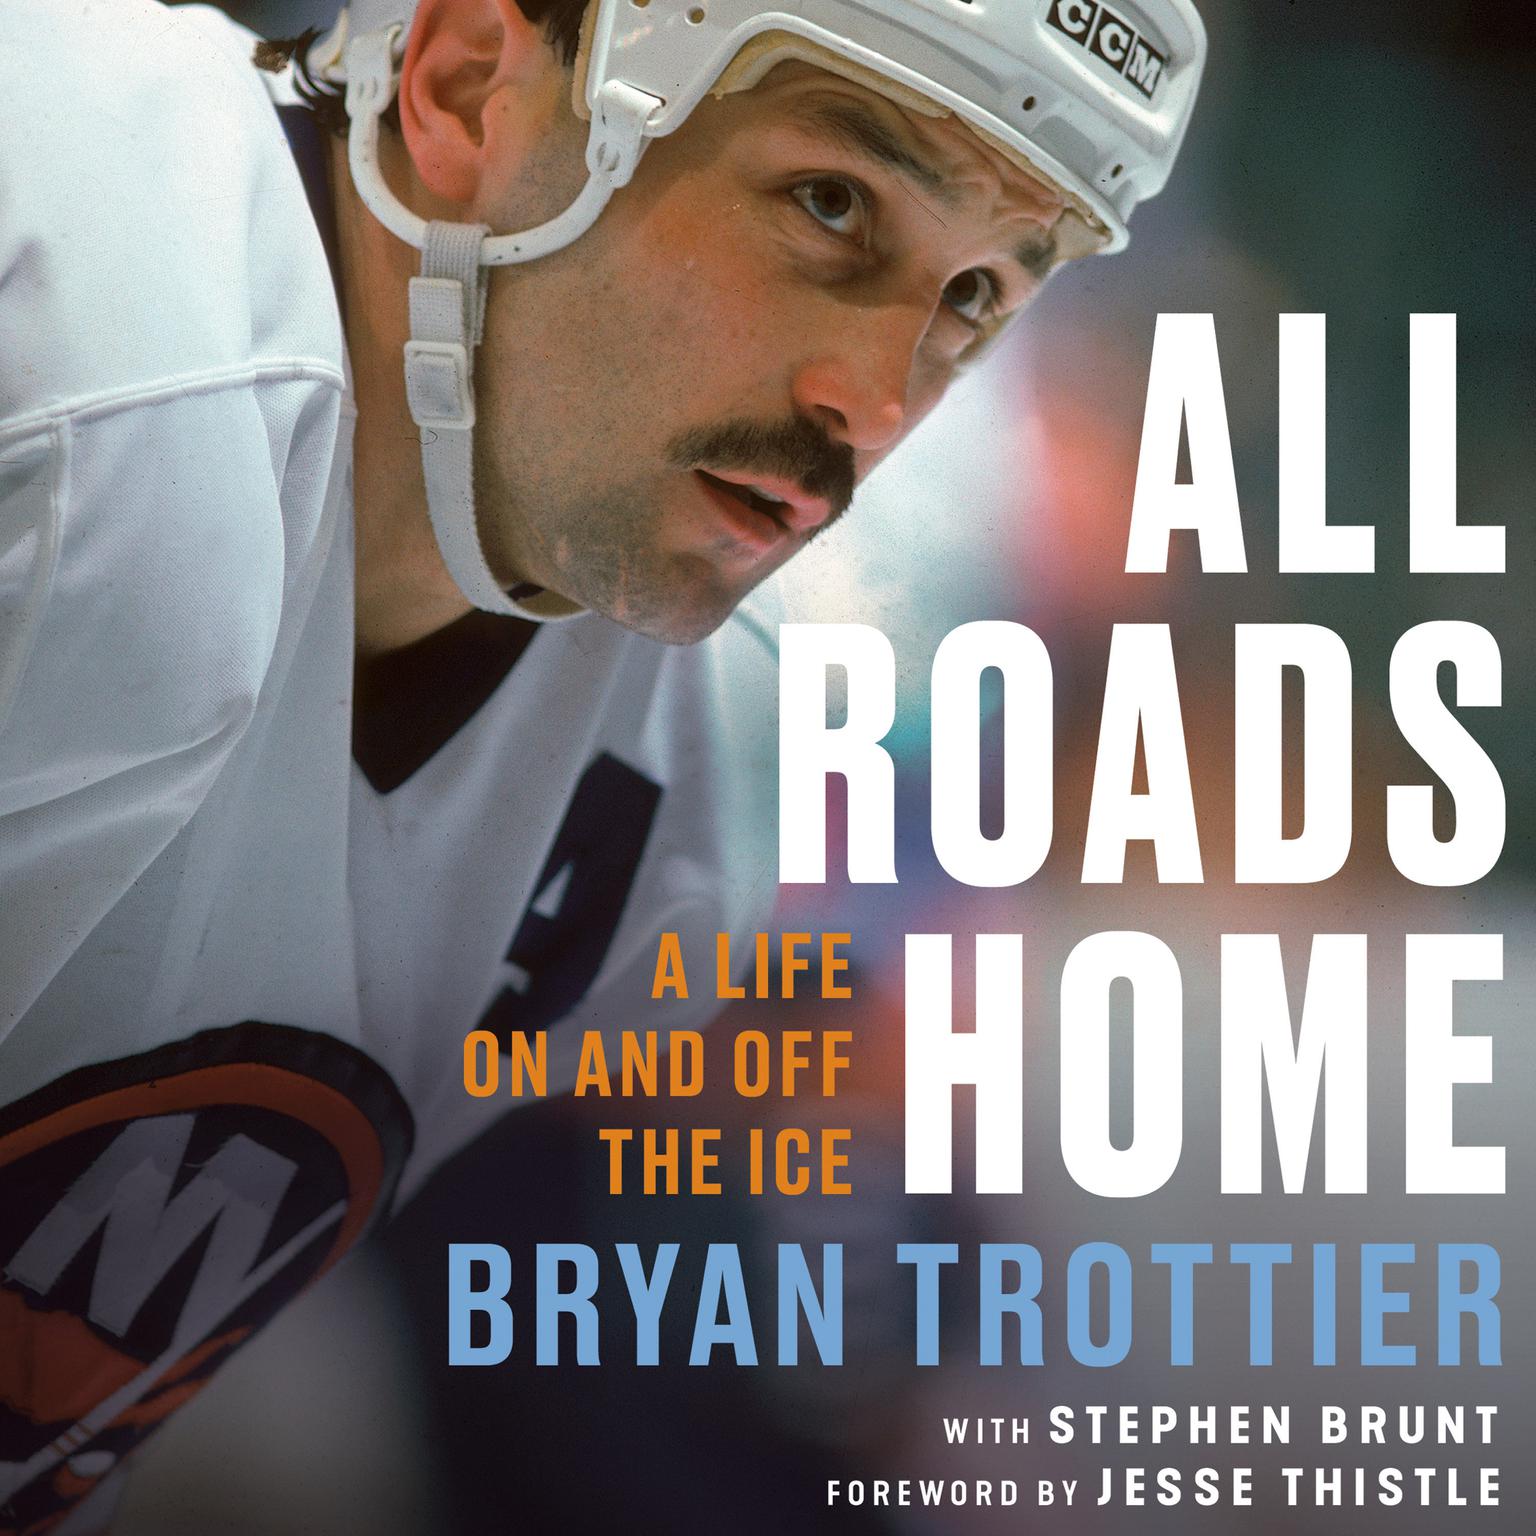 All Roads Home: A Life On and Off the Ice Audiobook, by Bryan Trottier